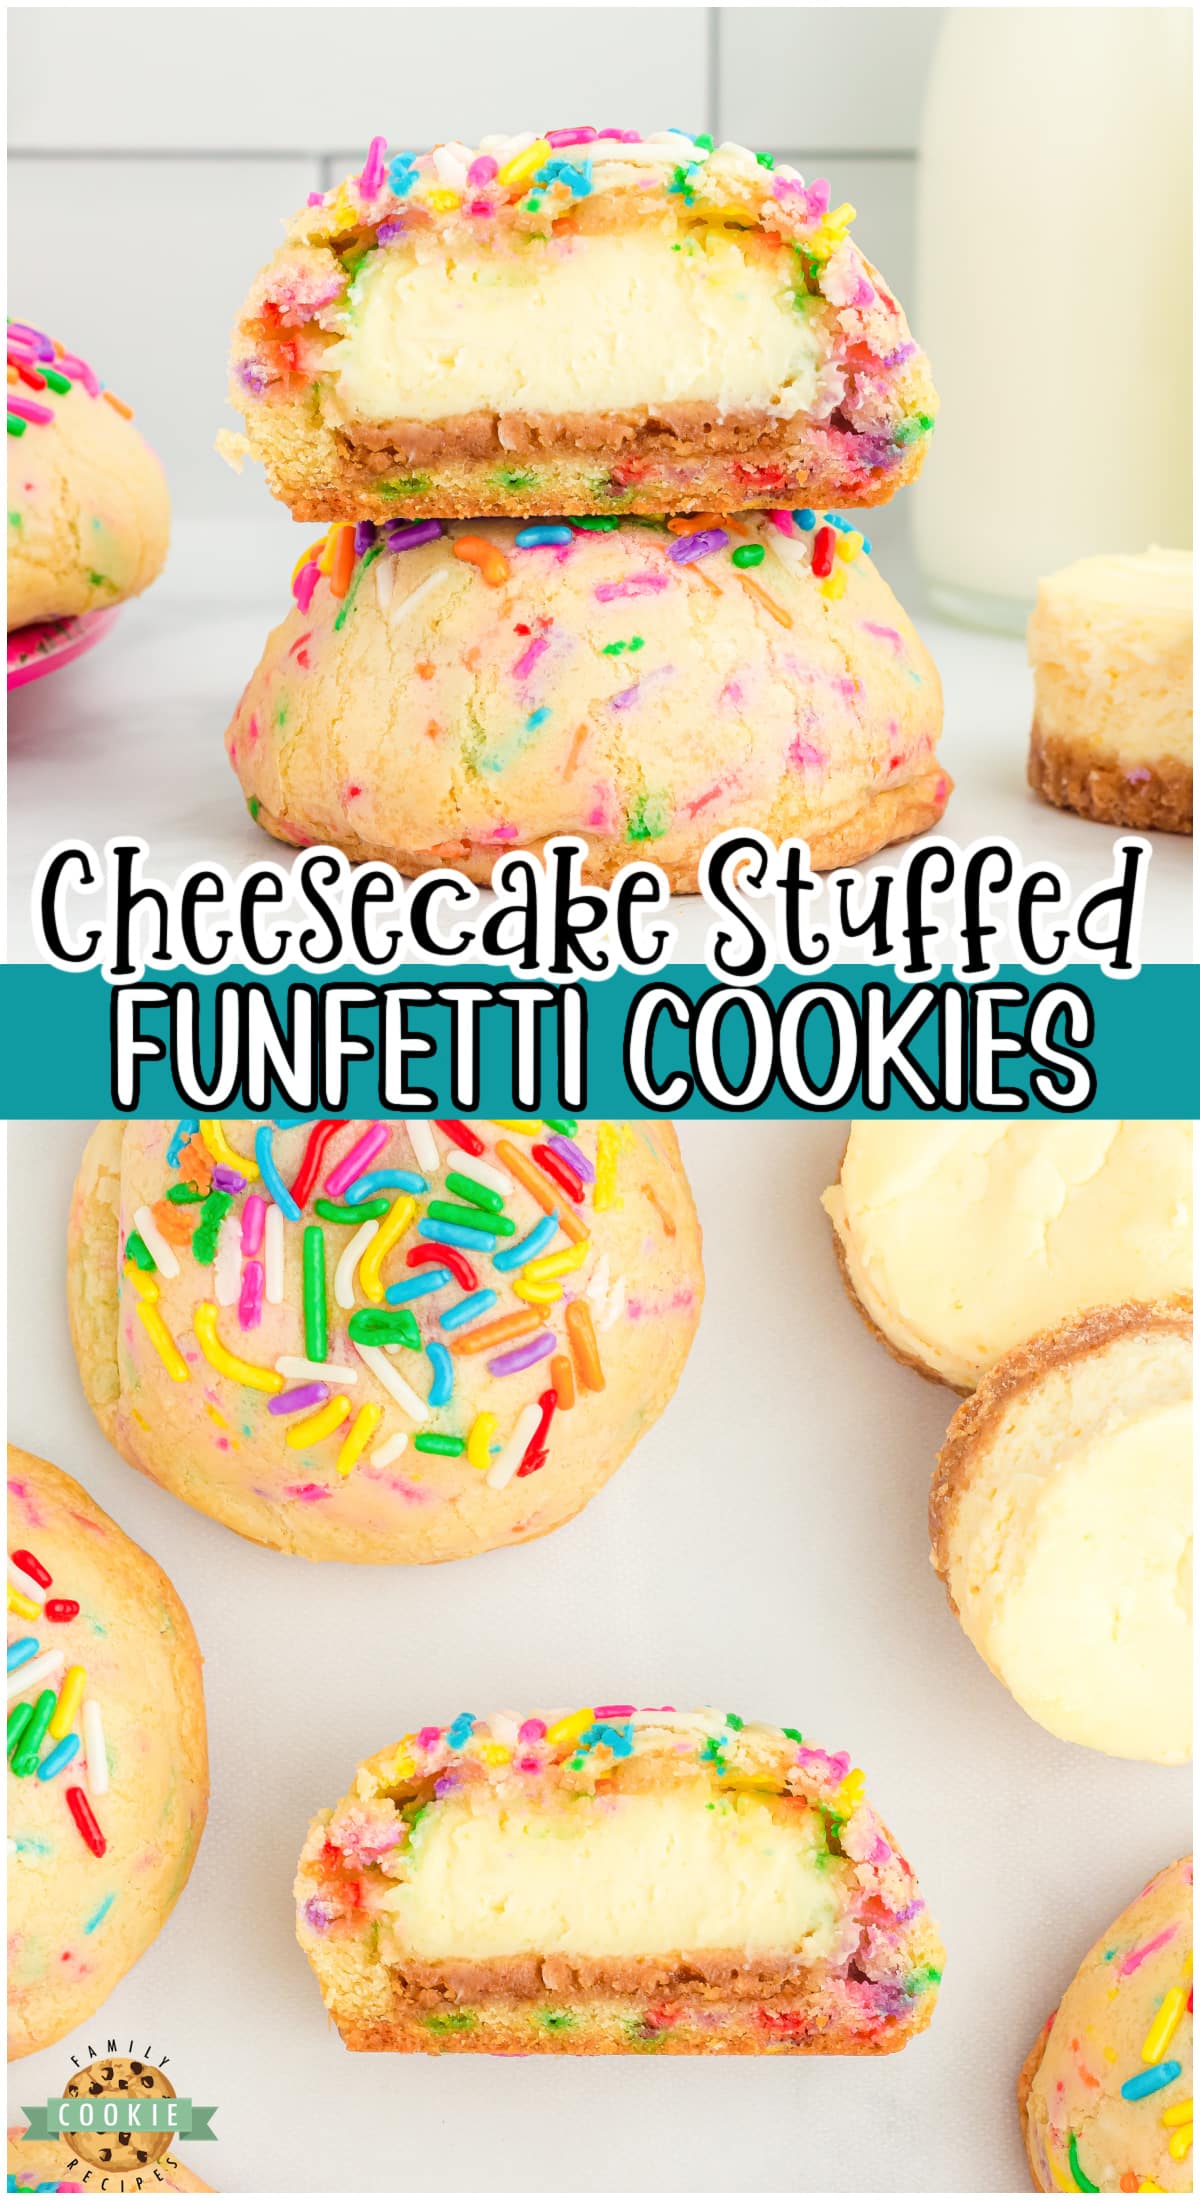 Cheesecake Stuffed Funfetti Cookies are two epic desserts in one: creamy cheesecake stuffed in soft, sweet cookie dough with sprinkles!